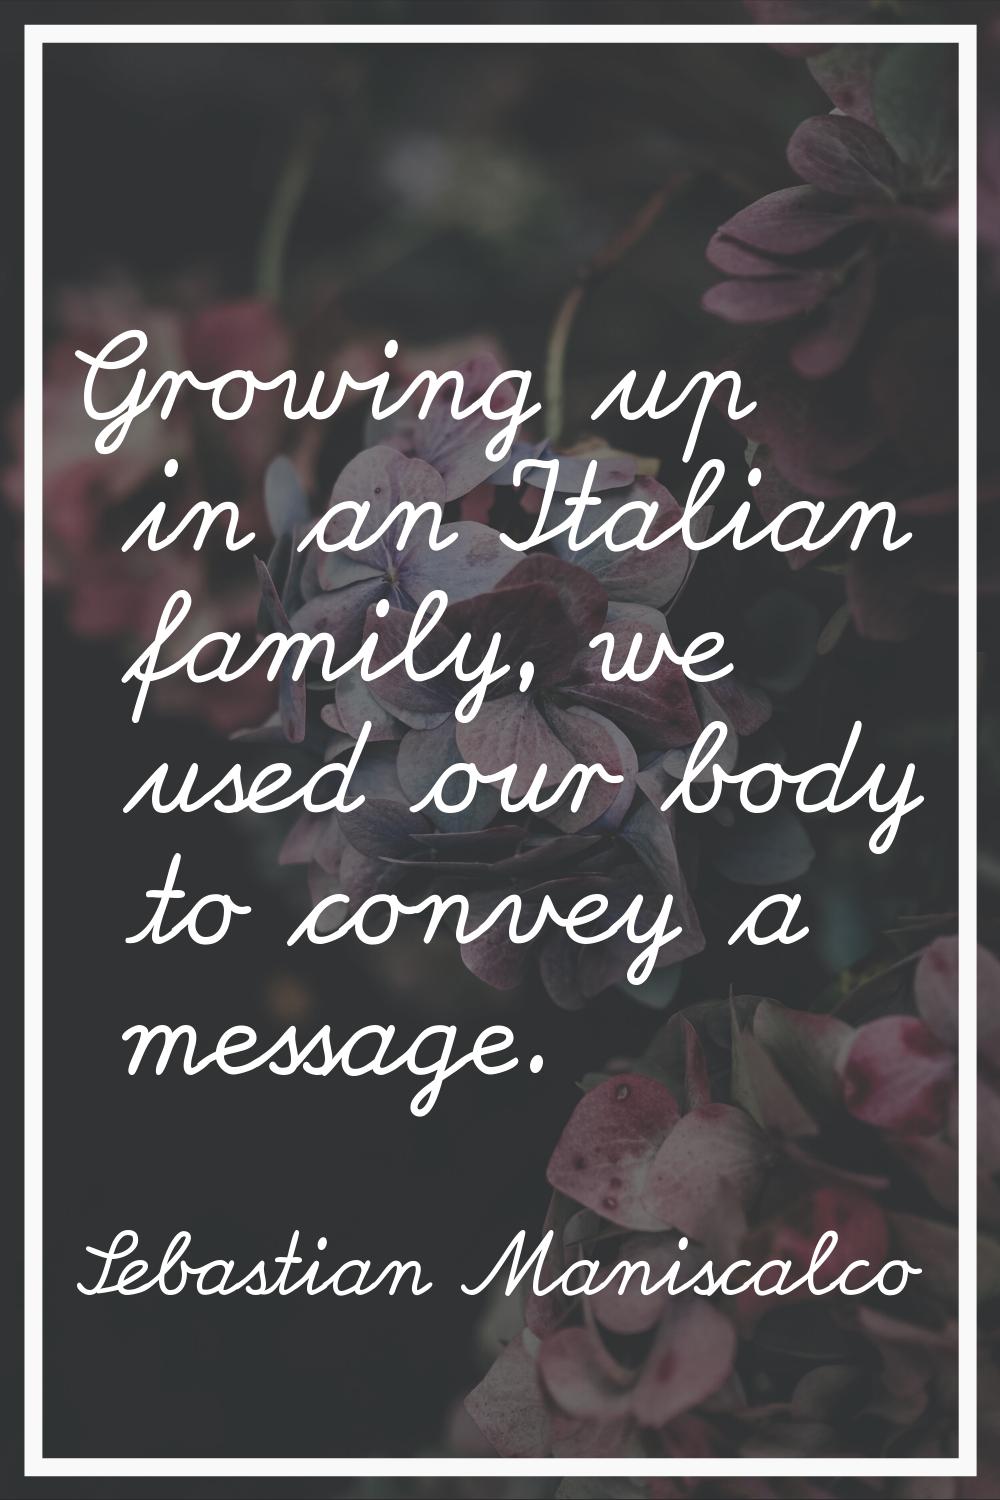 Growing up in an Italian family, we used our body to convey a message.